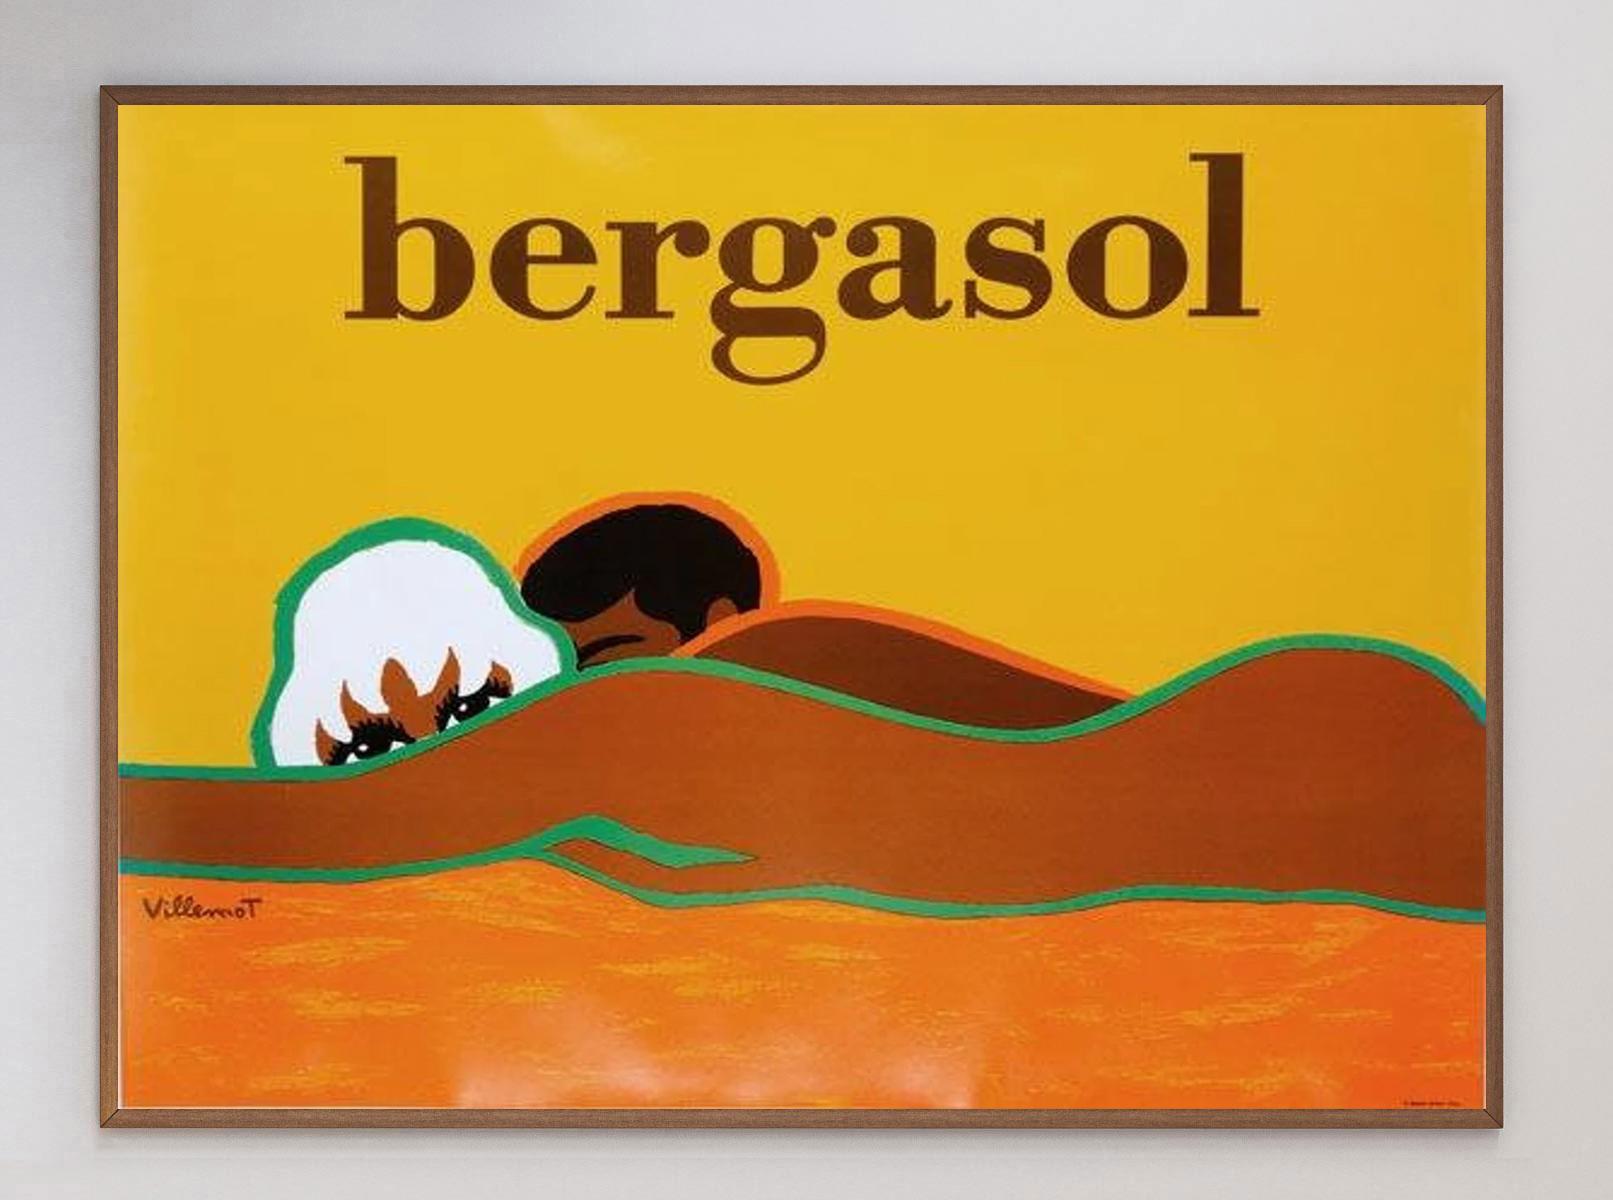 This gorgeous lithograph poster from 1976 was designed by the iconic poster and graphic designer Bernard Villemot. Best known for his collaborations with the likes of Bally, Air France and Perrier, he is known as one of the greatest commercial